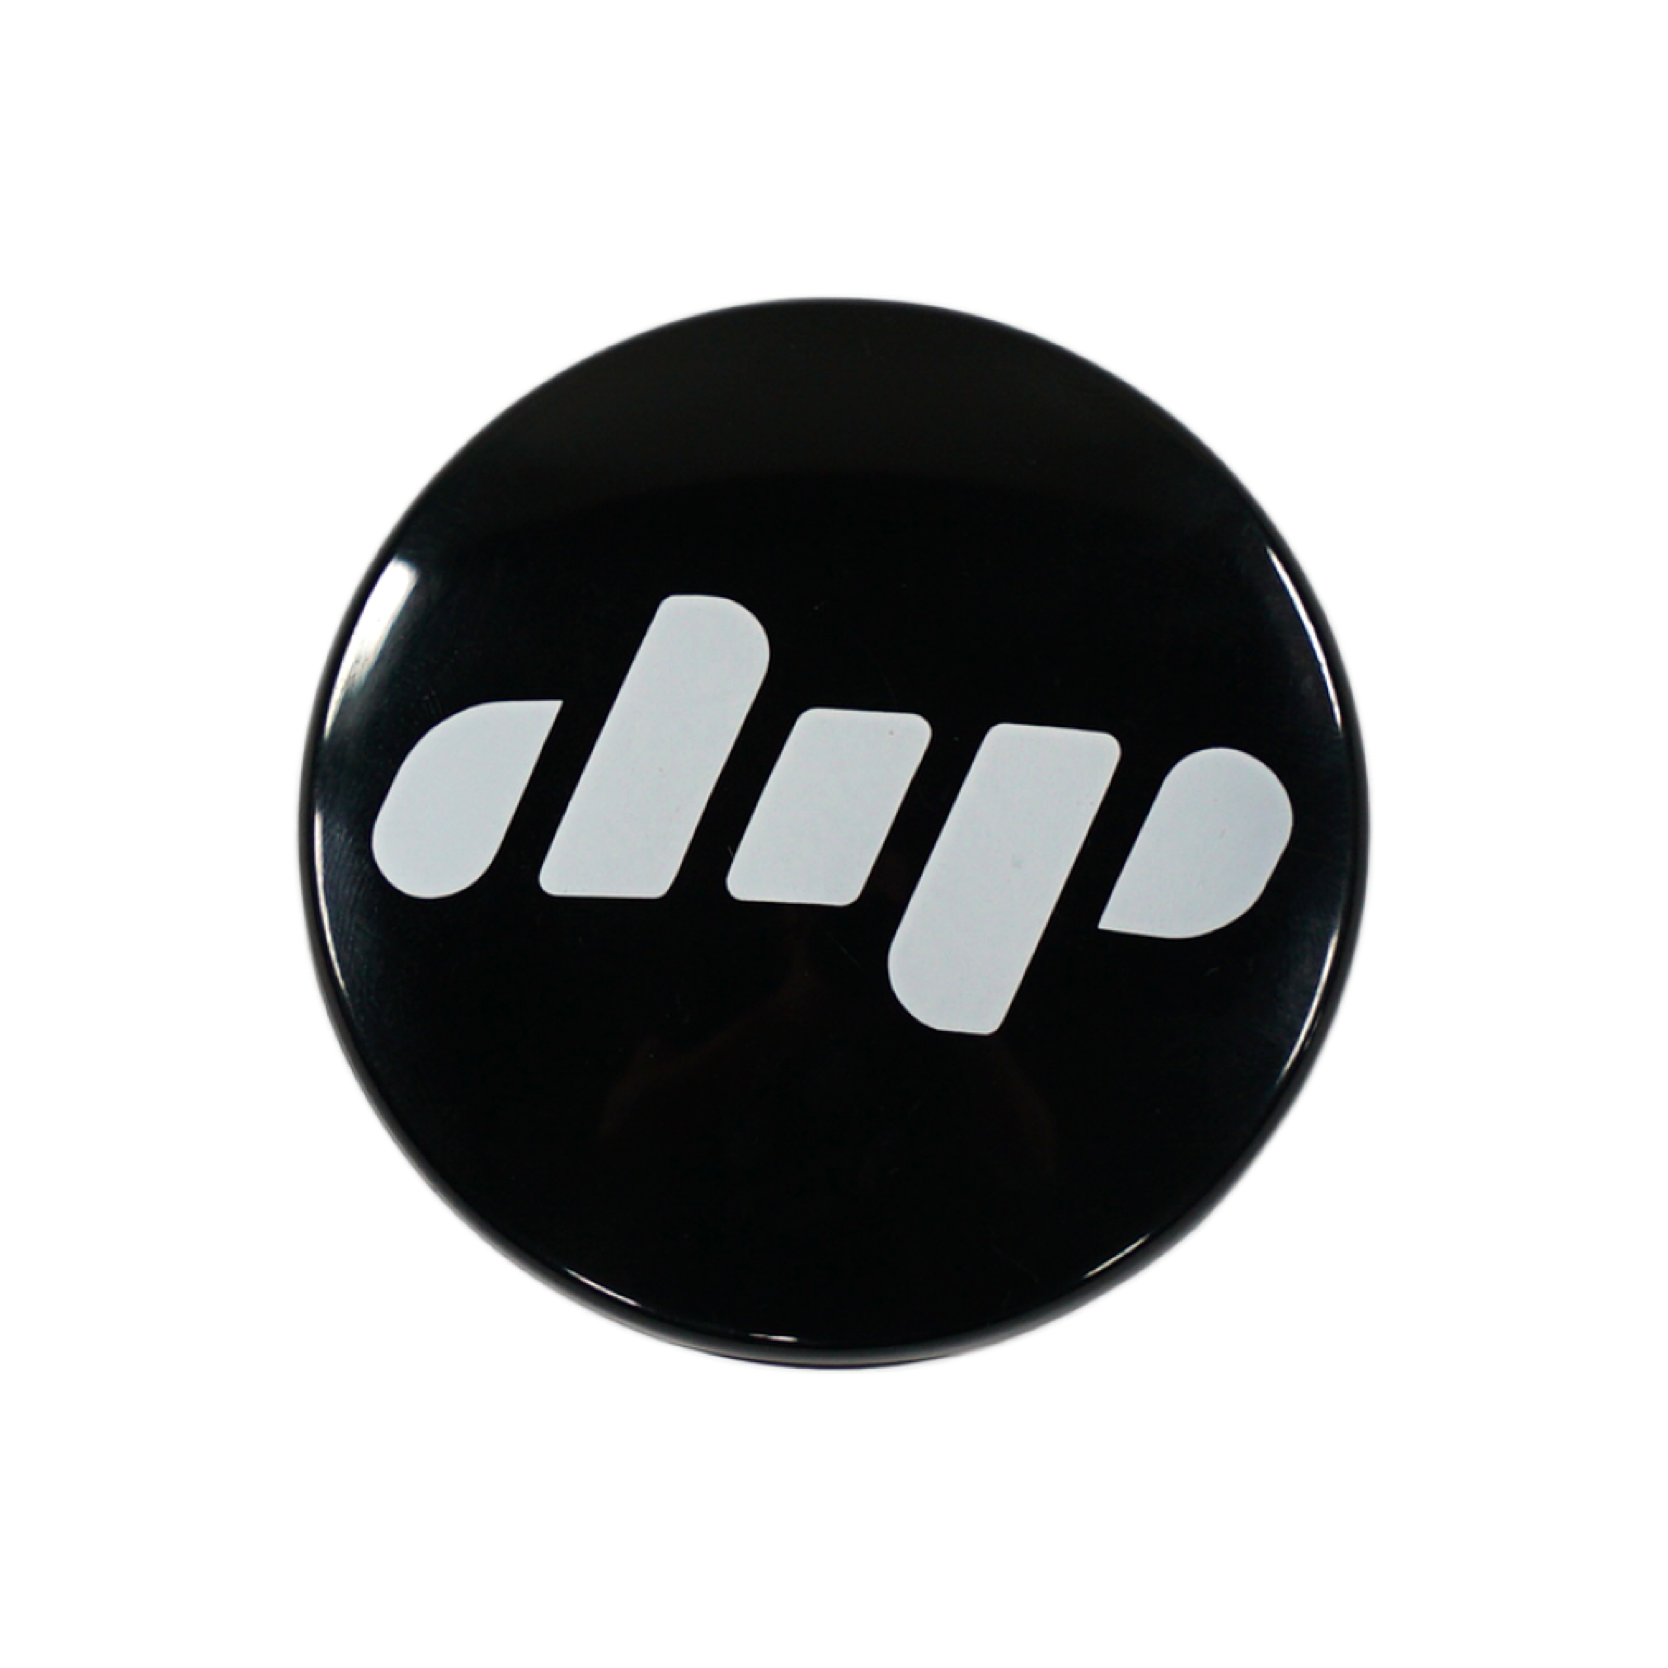 Dip Devices Clam Shell Concentrate Container by Dip Devices | Mission Dispensary